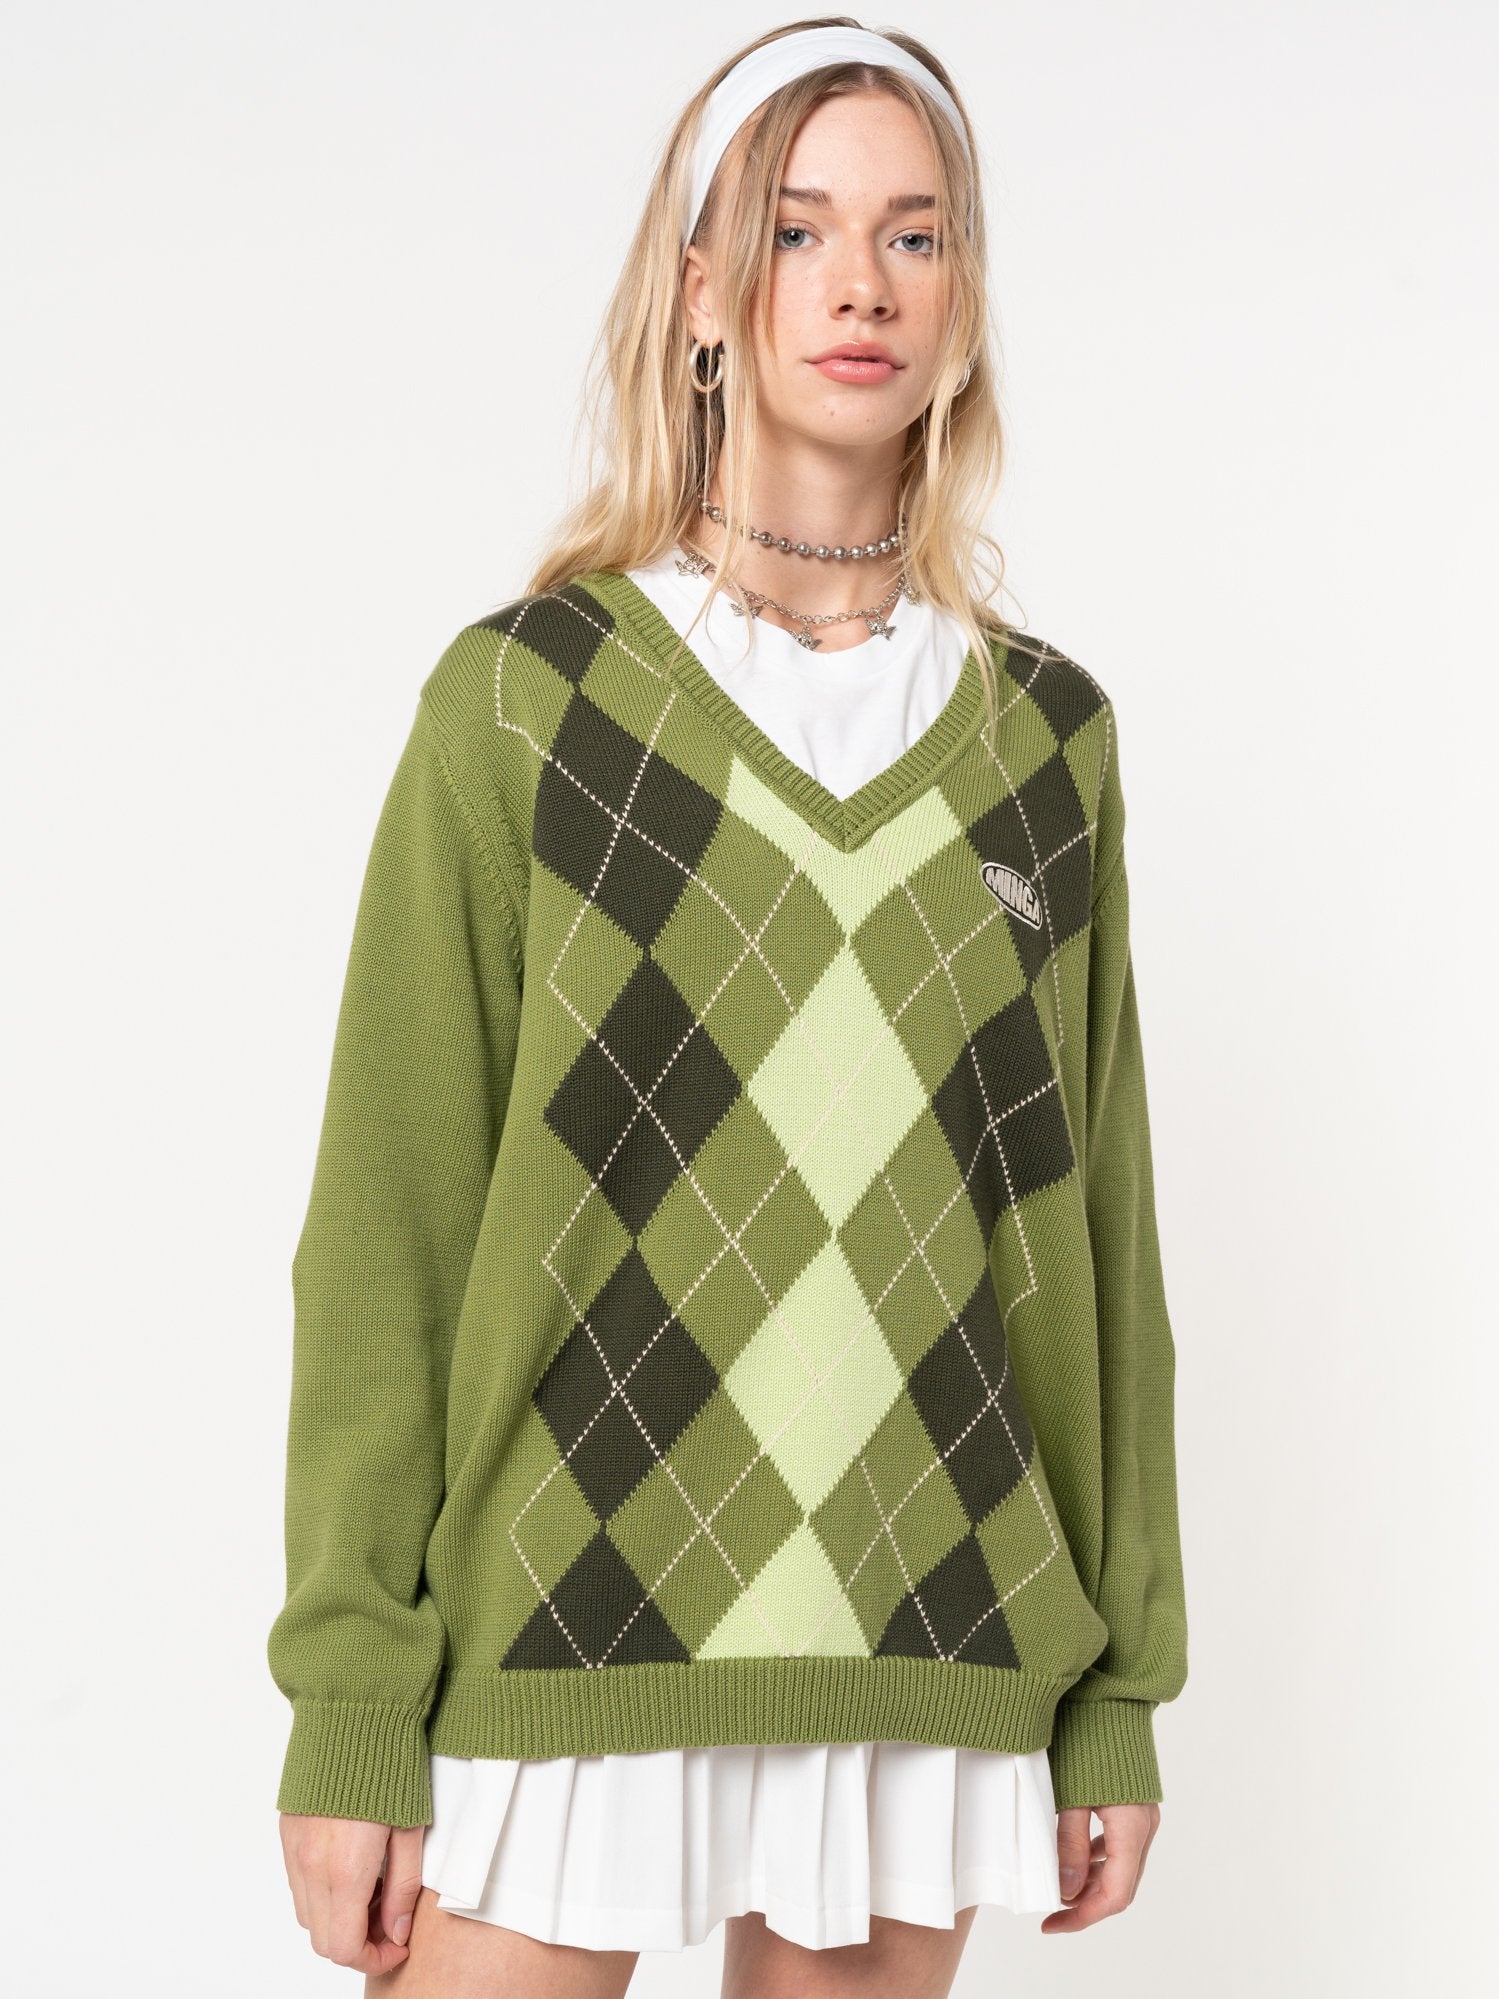 Loose knitted jumper with argyle pattern in green tones